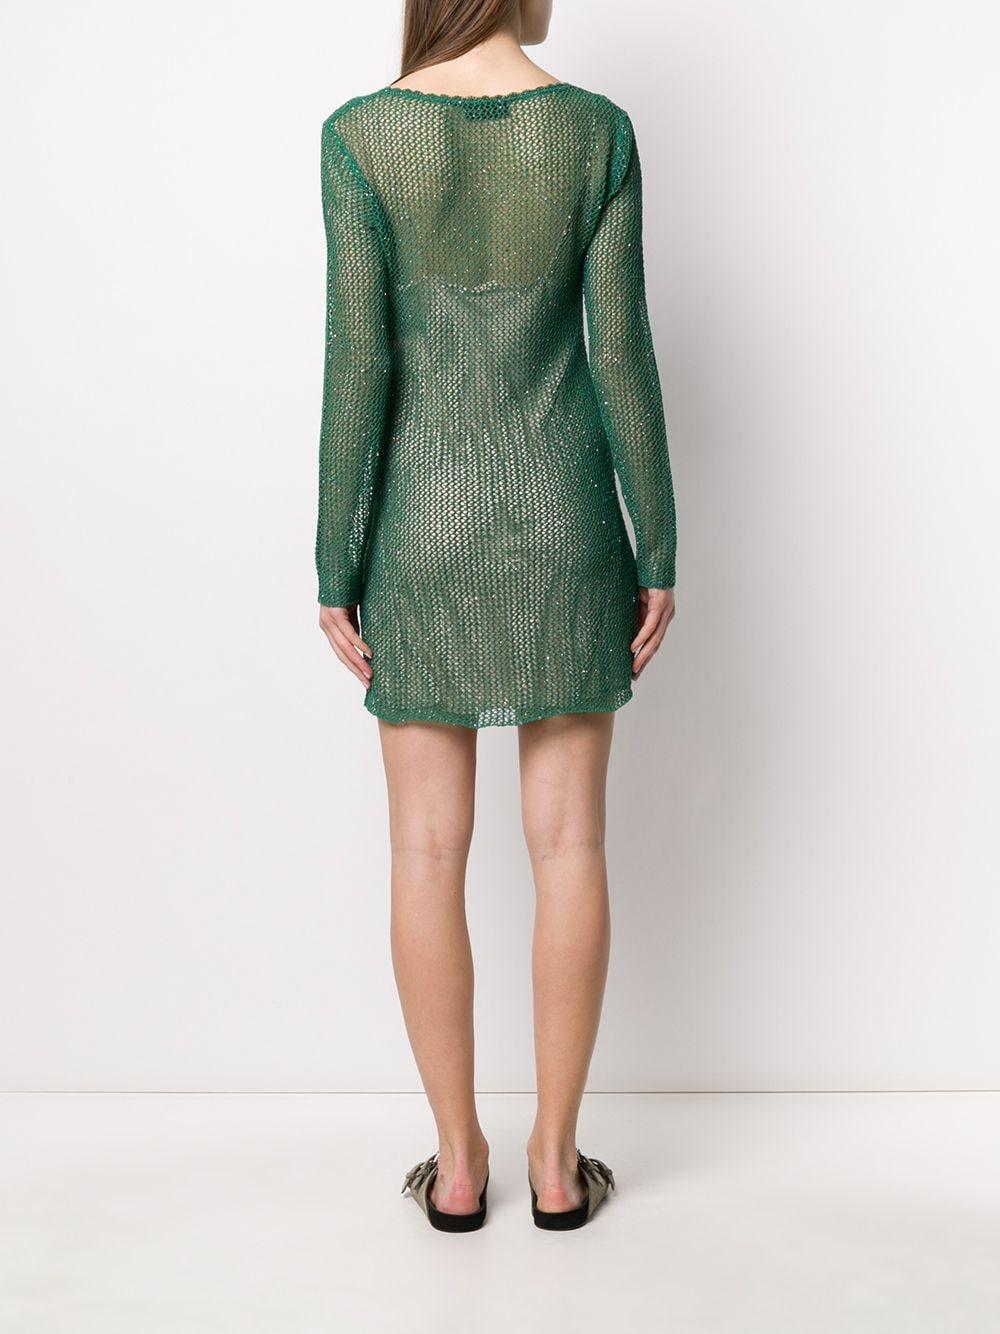 Alanui Synthetic Sheer Knitted Dress in Green - Save 14% - Lyst